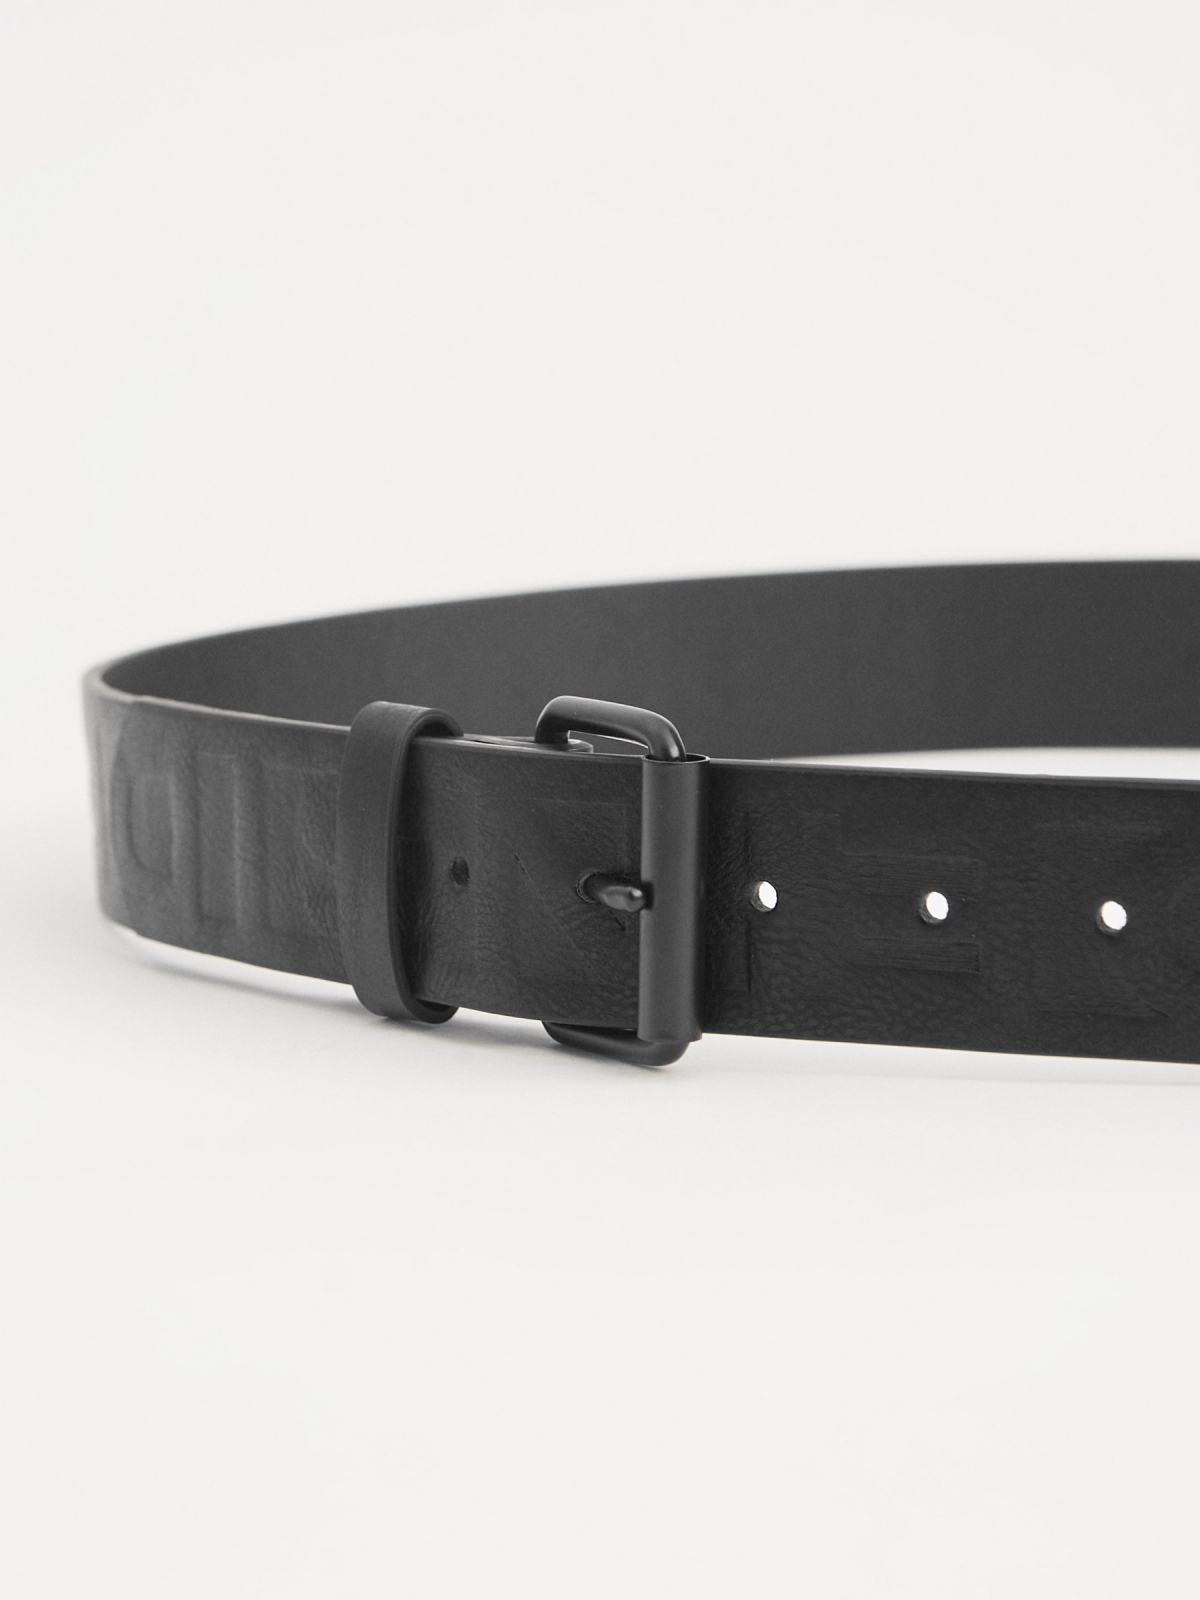 Engraved leather effect belt black detail view